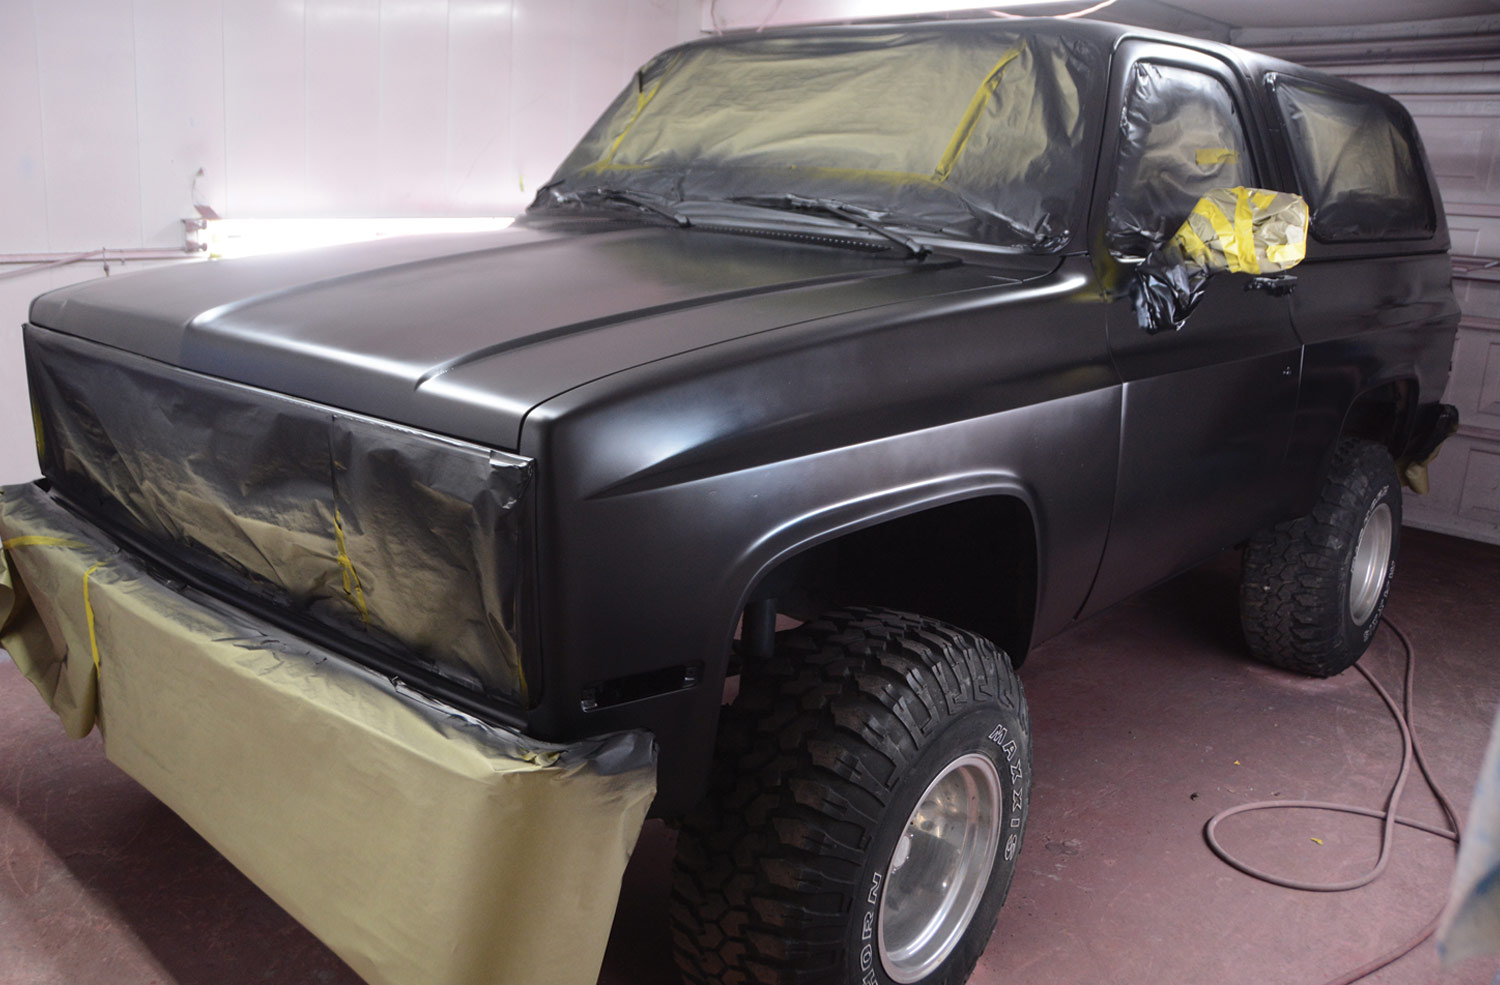 front view of the Blazer with two coats of flat black paint